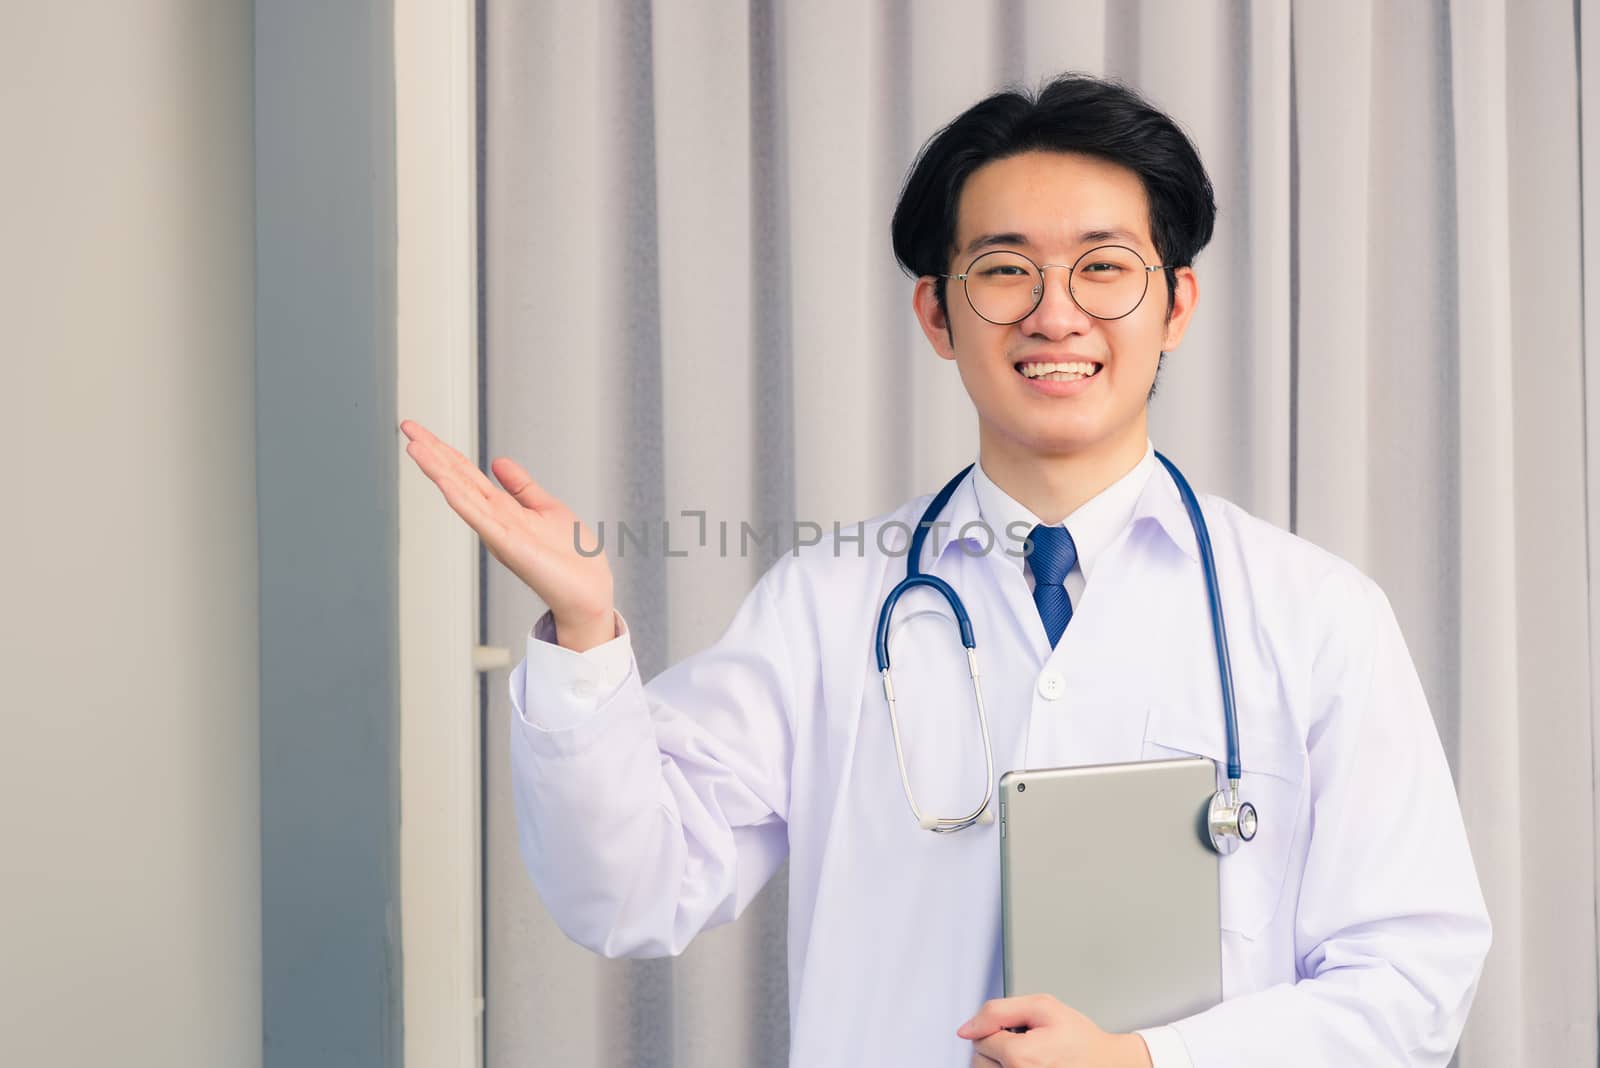 Portrait closeup of Happy Asian young doctor handsome man smiling in uniform and stethoscope neck strap holding smart digital tablet on hand and showing hand to side away, healthcare medicine concept